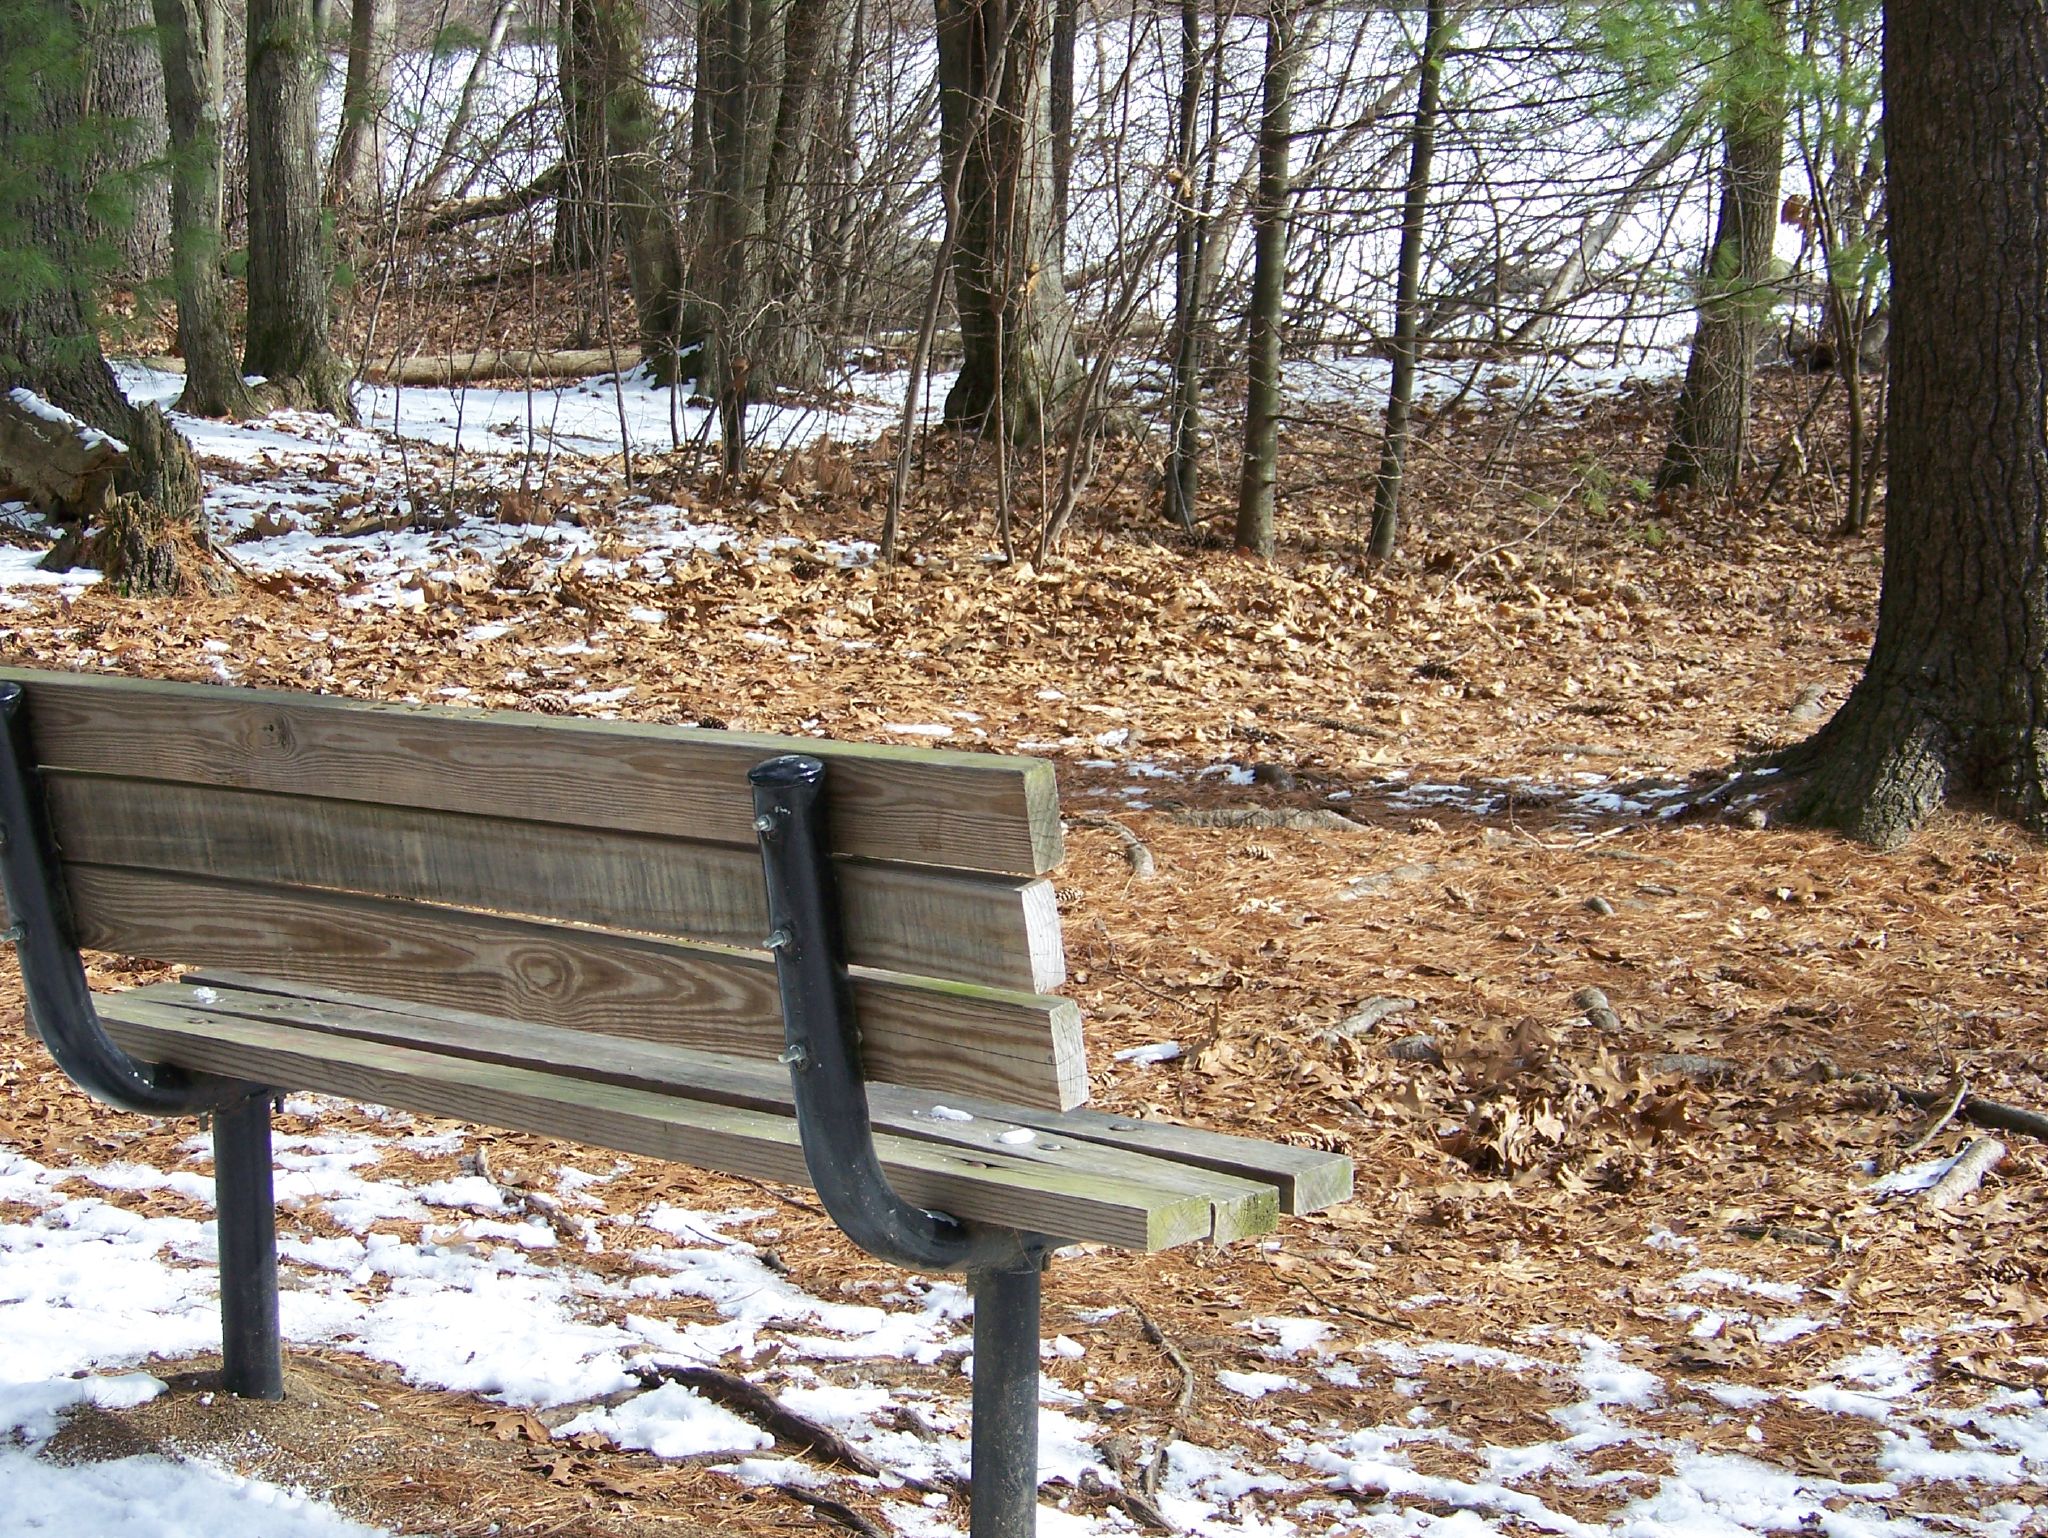 a bench in a clearing surrounded by winter foliage